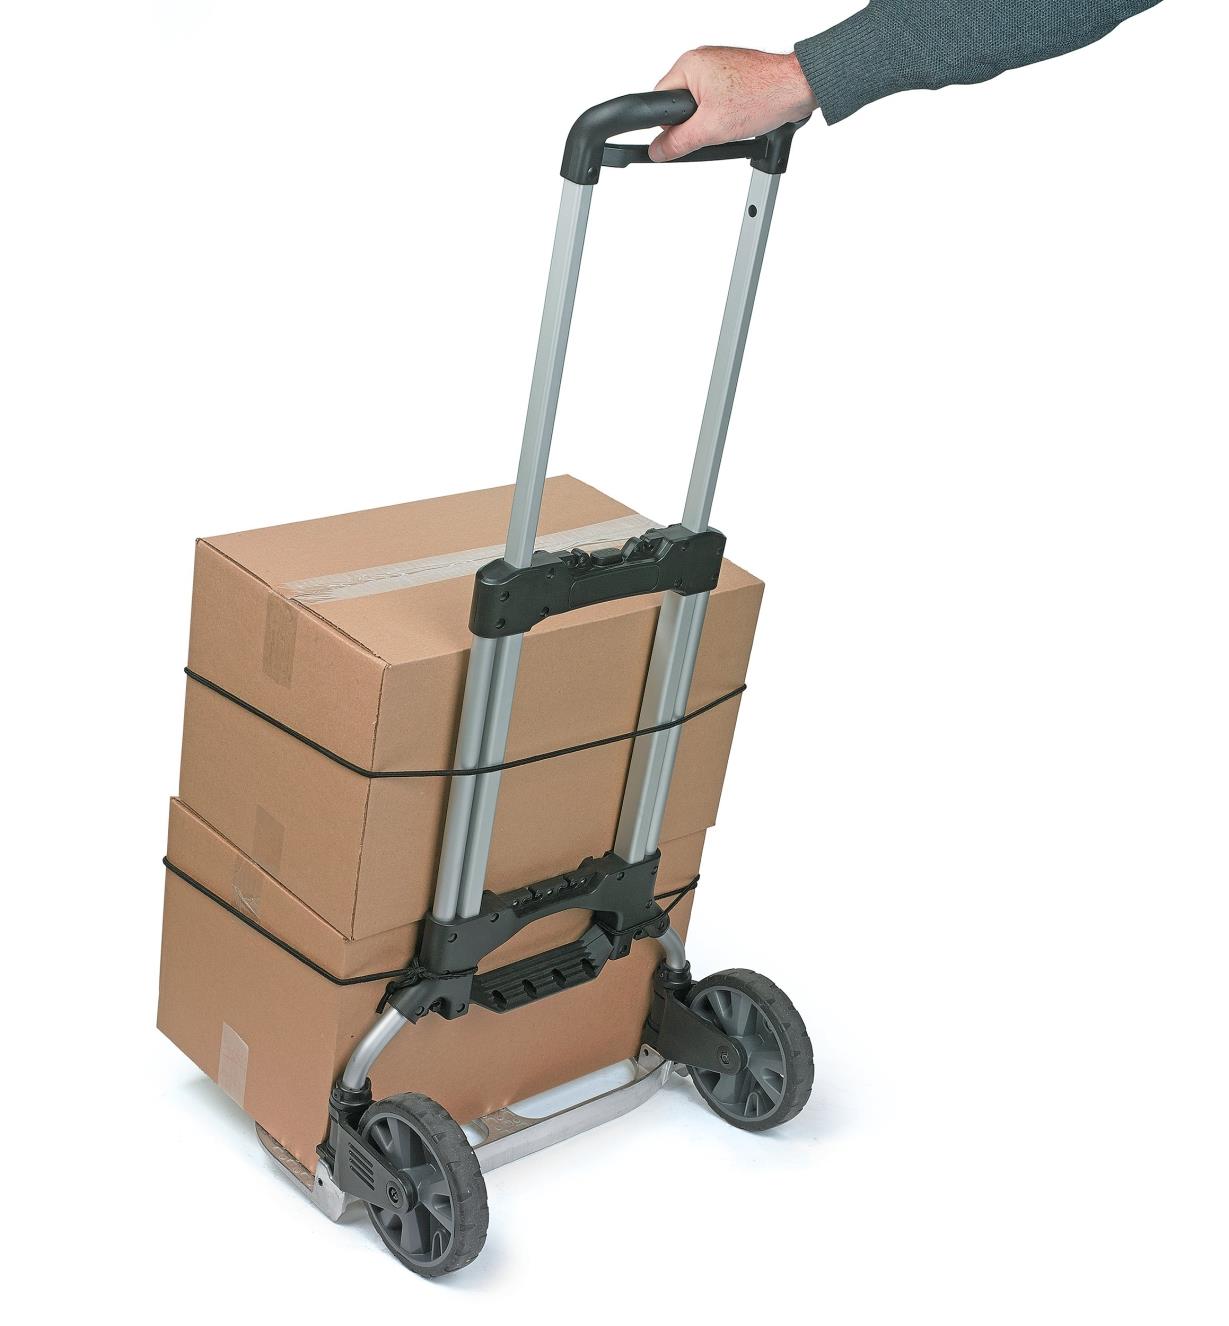 Using the Folding Hand Truck to move cardboard boxes